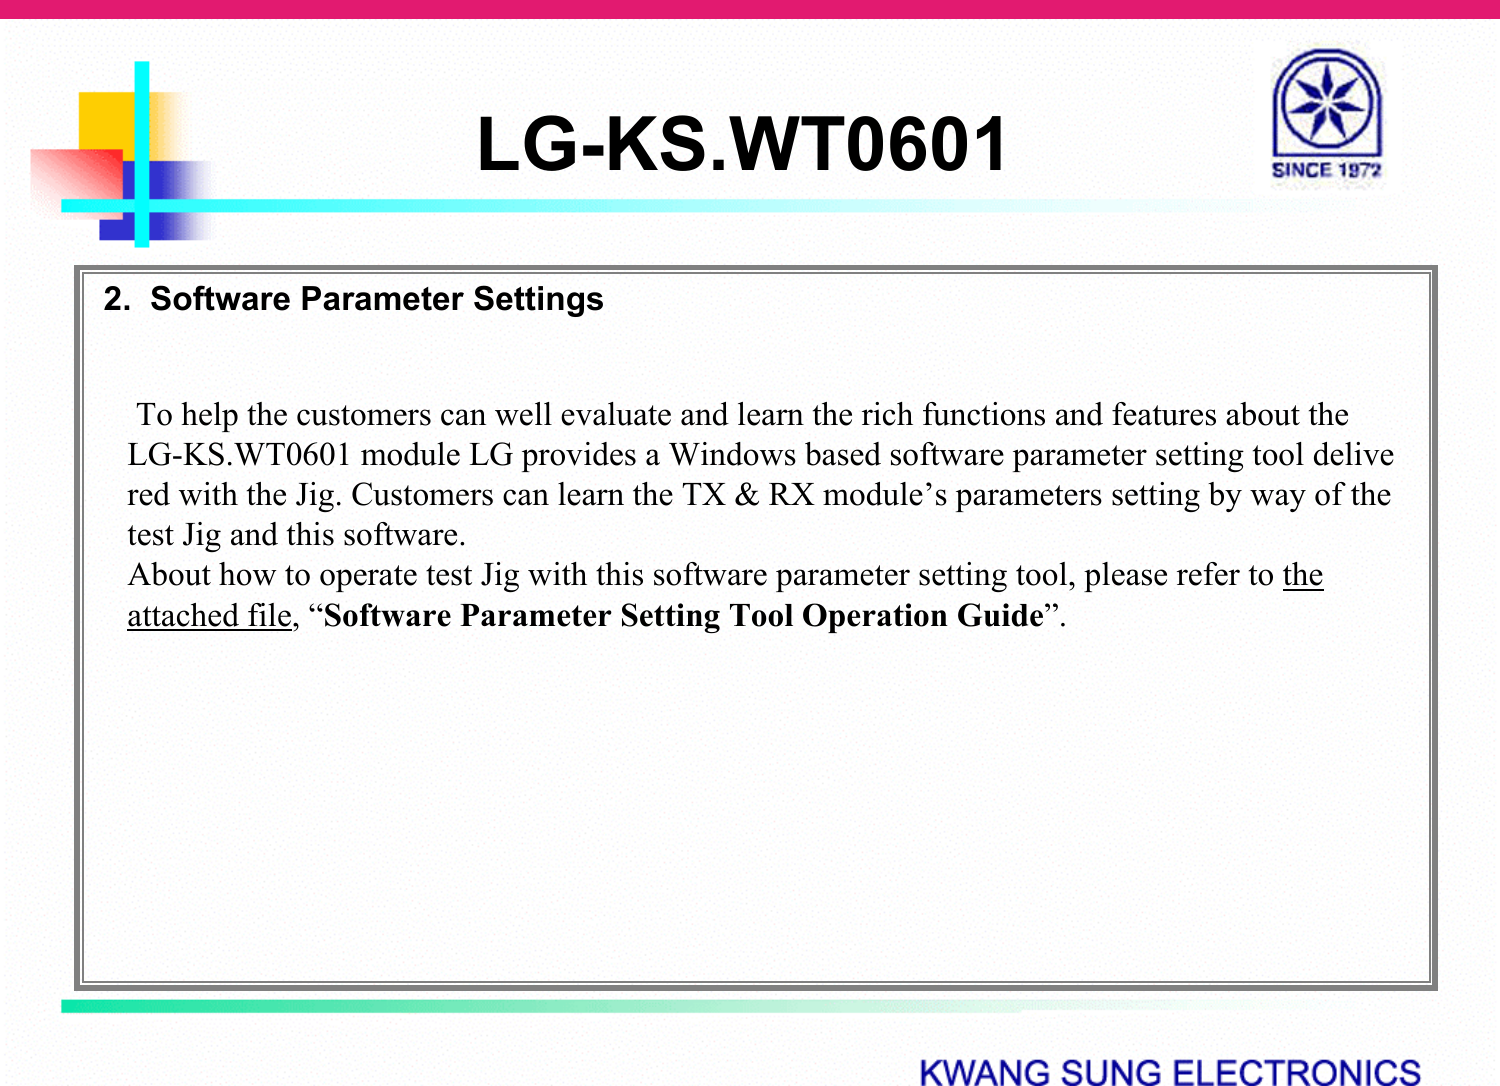 LG-KS.WT06012.  Software Parameter SettingsTo help the customers can well evaluate and learn the rich functions and features about the LG-KS.WT0601 module LG provides a Windows based software parameter setting tool delivered with the Jig. Customers can learn the TX &amp; RX module’s parameters setting by way of the test Jig and this software.About how to operate test Jig with this software parameter setting tool, please refer to the attached file, “Software Parameter Setting Tool Operation Guide”.